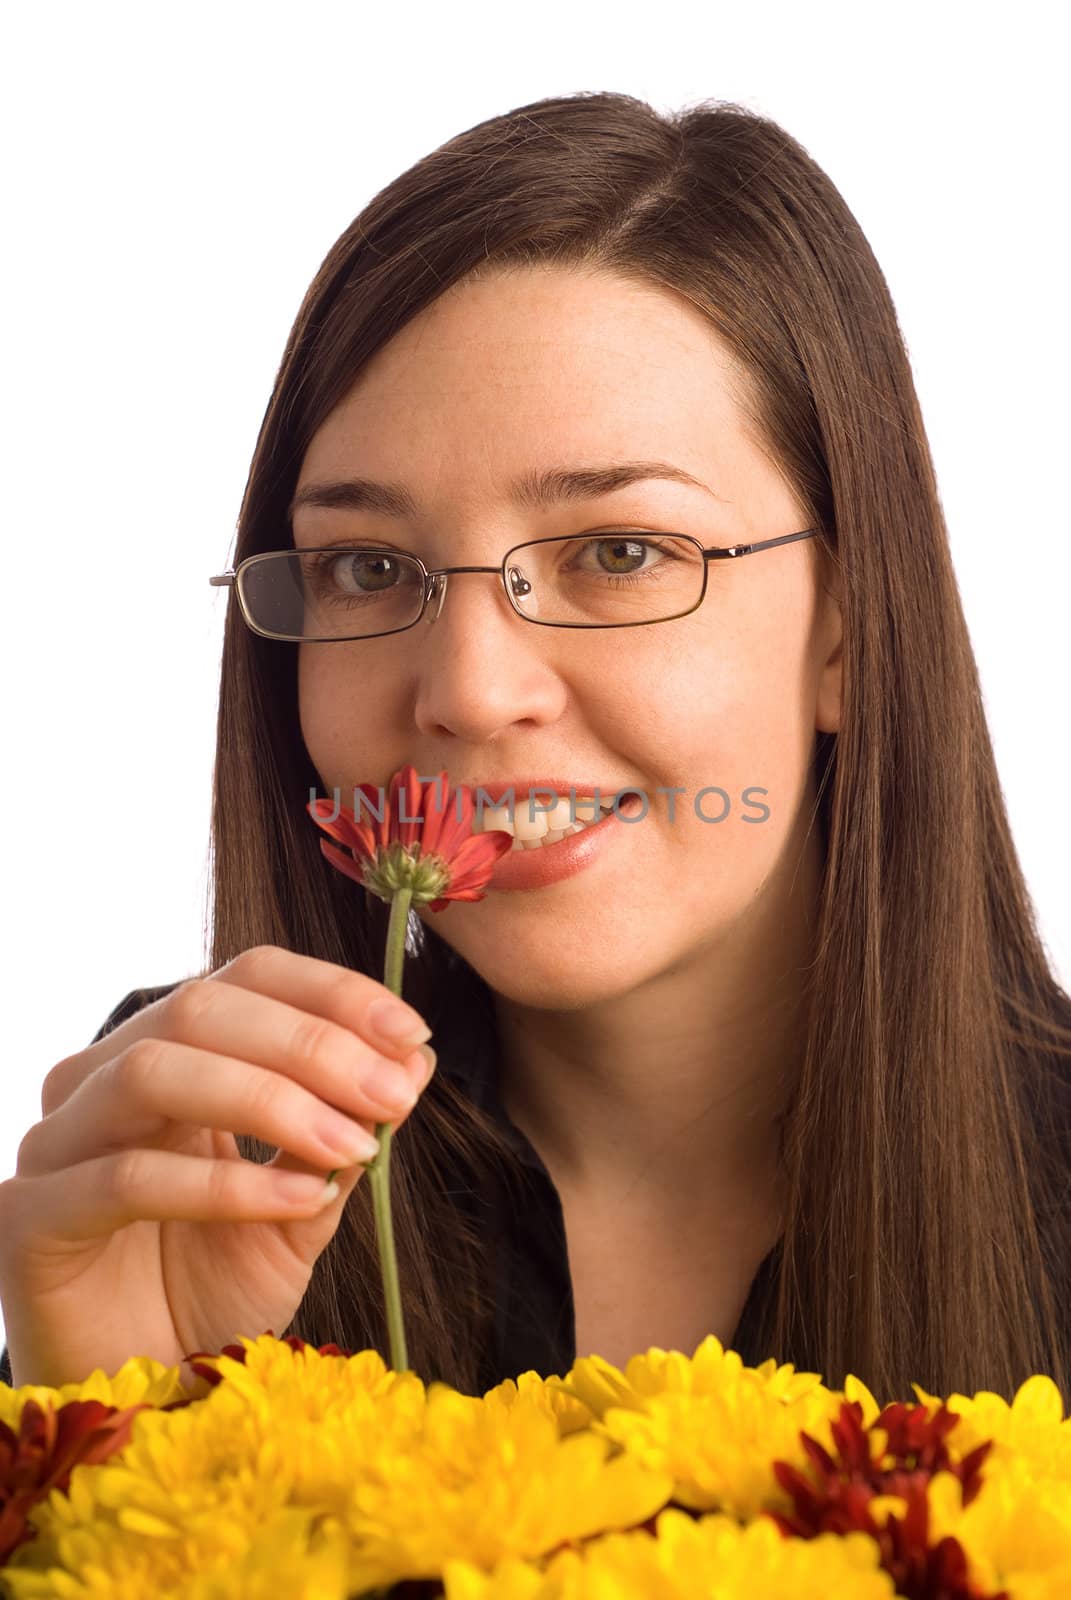 Secretary, assistant or student woman smelling flowers by alistaircotton